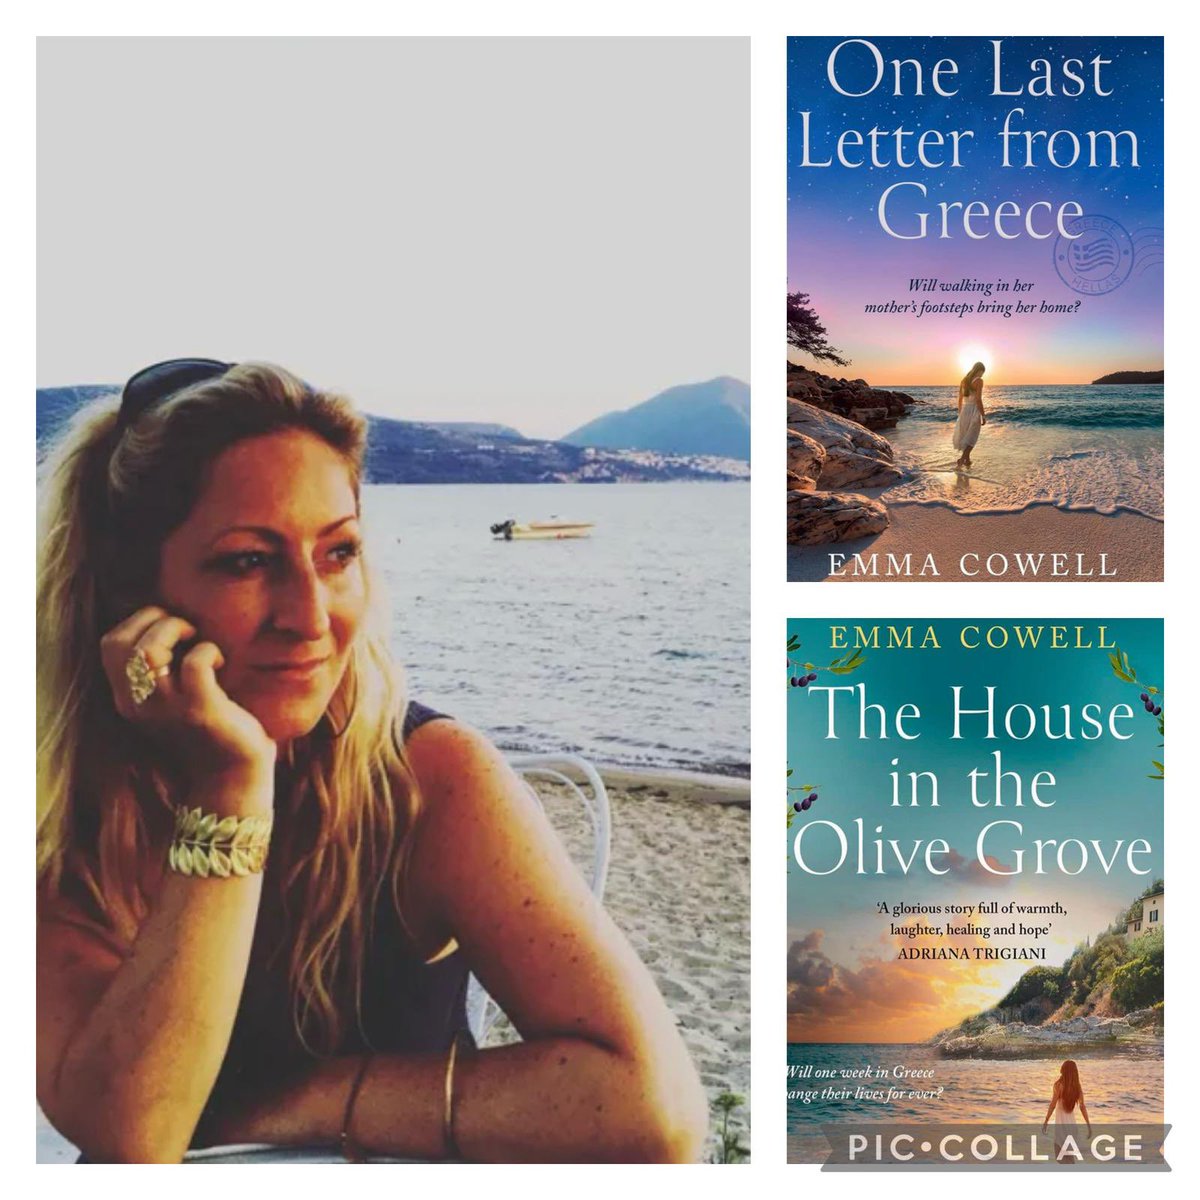 So looking forward to the @RoselandFest Join me in #stmawes for book chat, a glass of Greek rosé and sweet treats on April 20th! Limited tickets still available here : visittruro.org.uk/whats-on/rosel… @WaterstonesTRU @VisitCornwall #Greece #Cornwall #BookTwitter